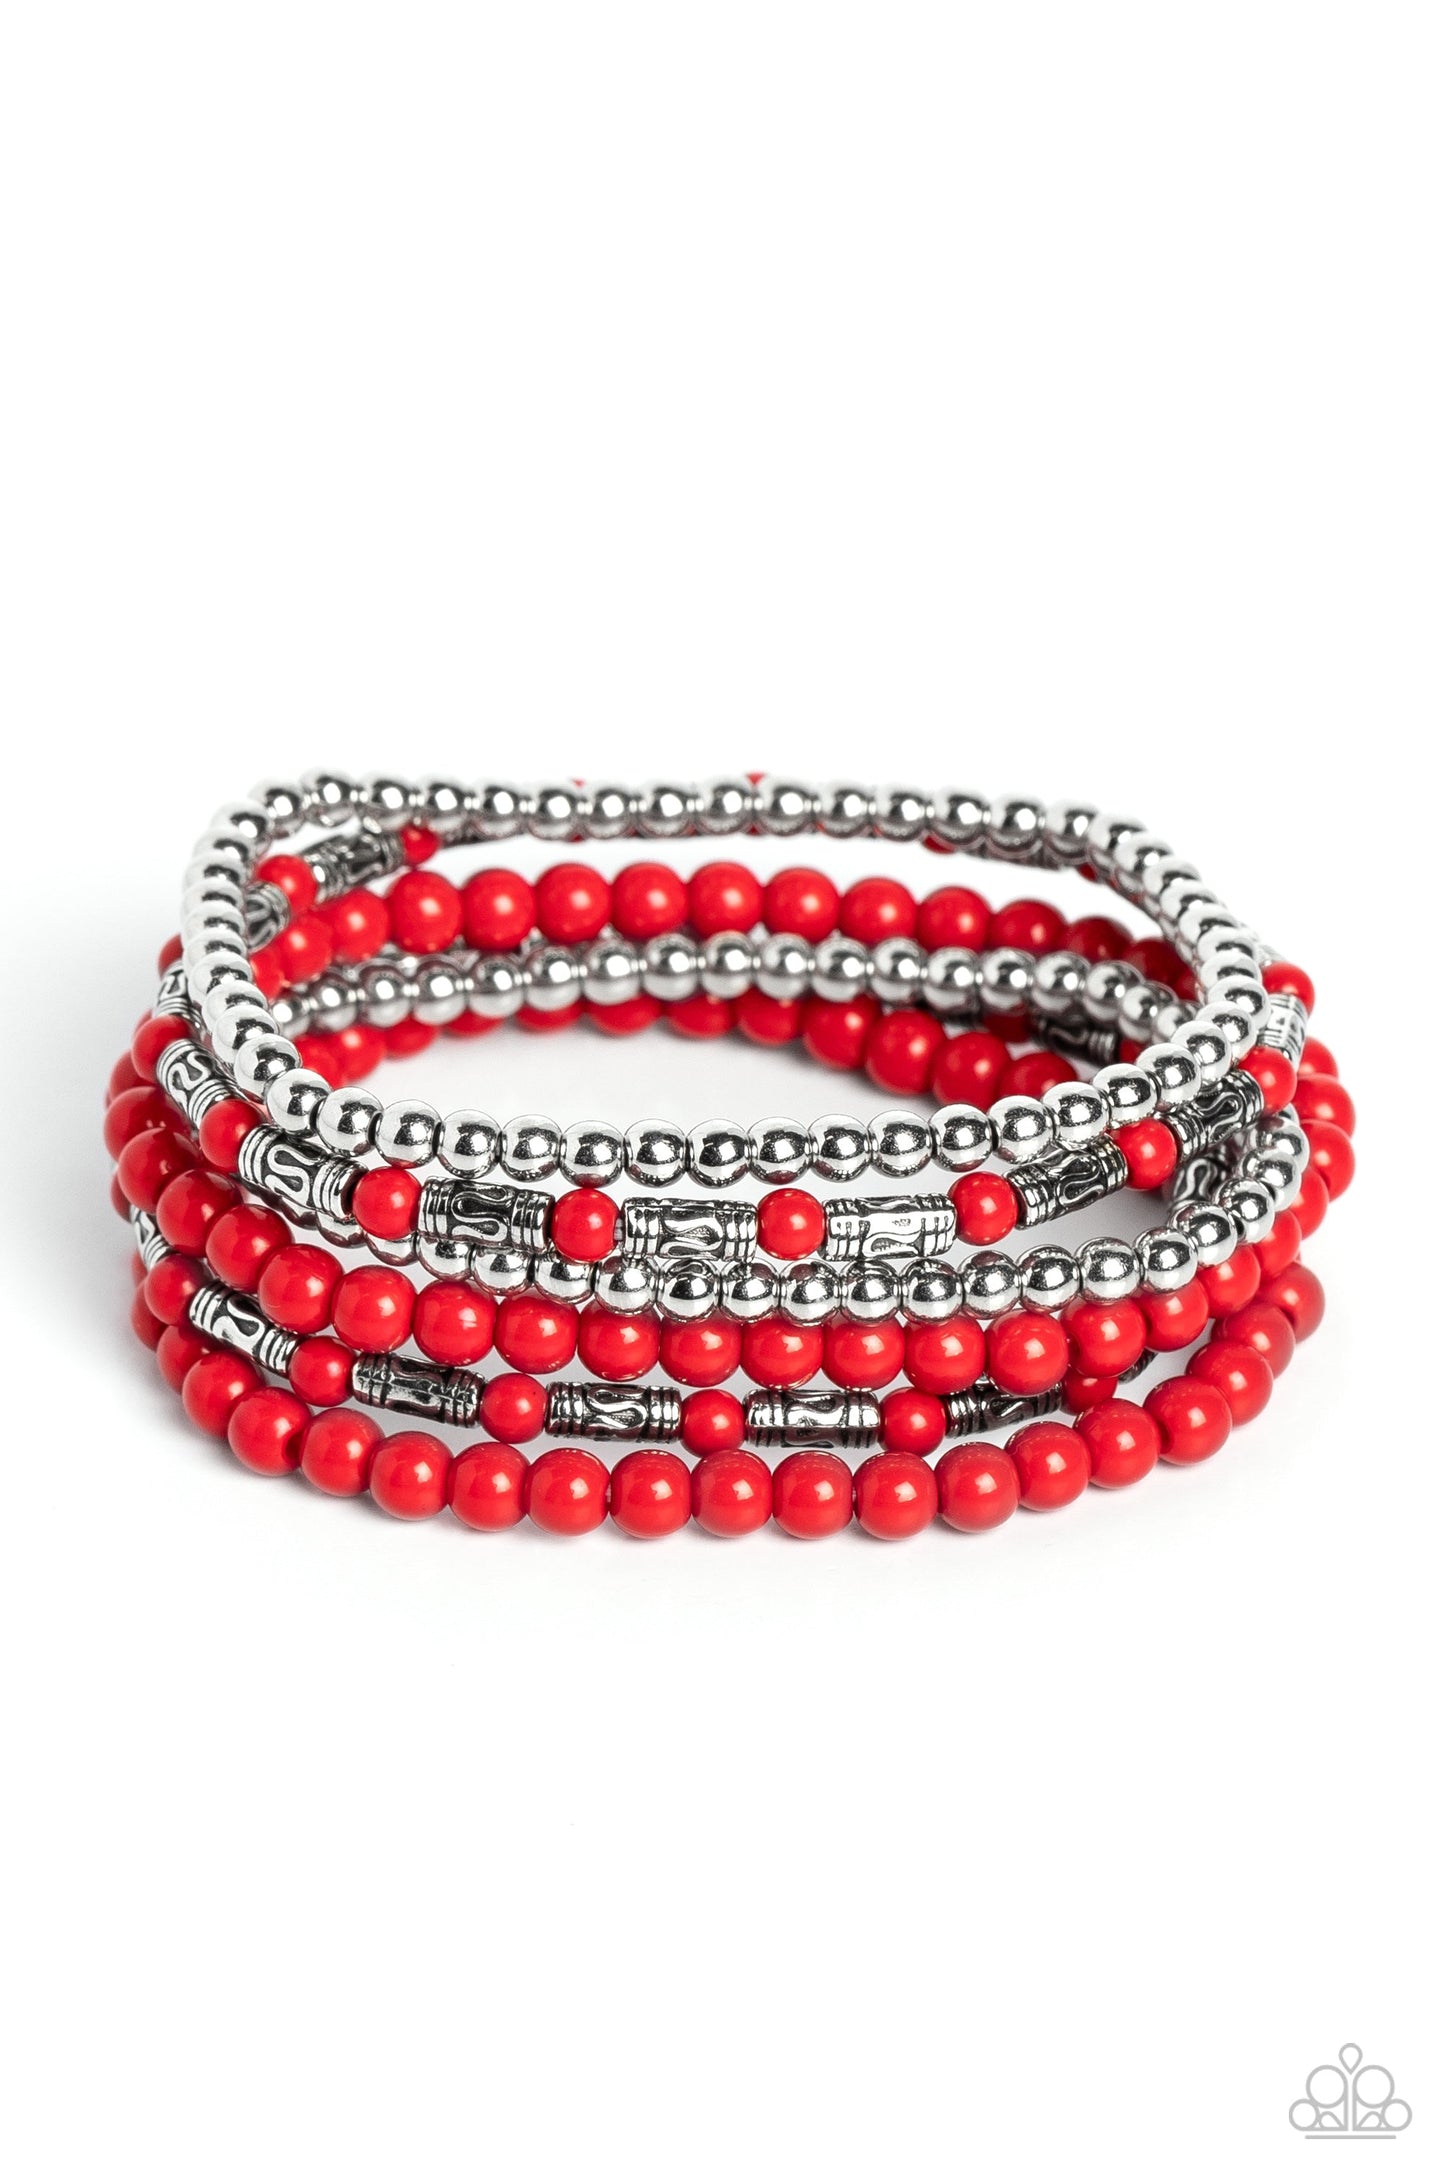 Mythical Magic - Red and Silver Bracelets - Paparazzi Accessories - A trendy collection of red, silver and silver cylindrical textured beads wrap around the wrist on elastic stretchy bands for a colorful, seasonal stack. Sold as one set of six bracelets.